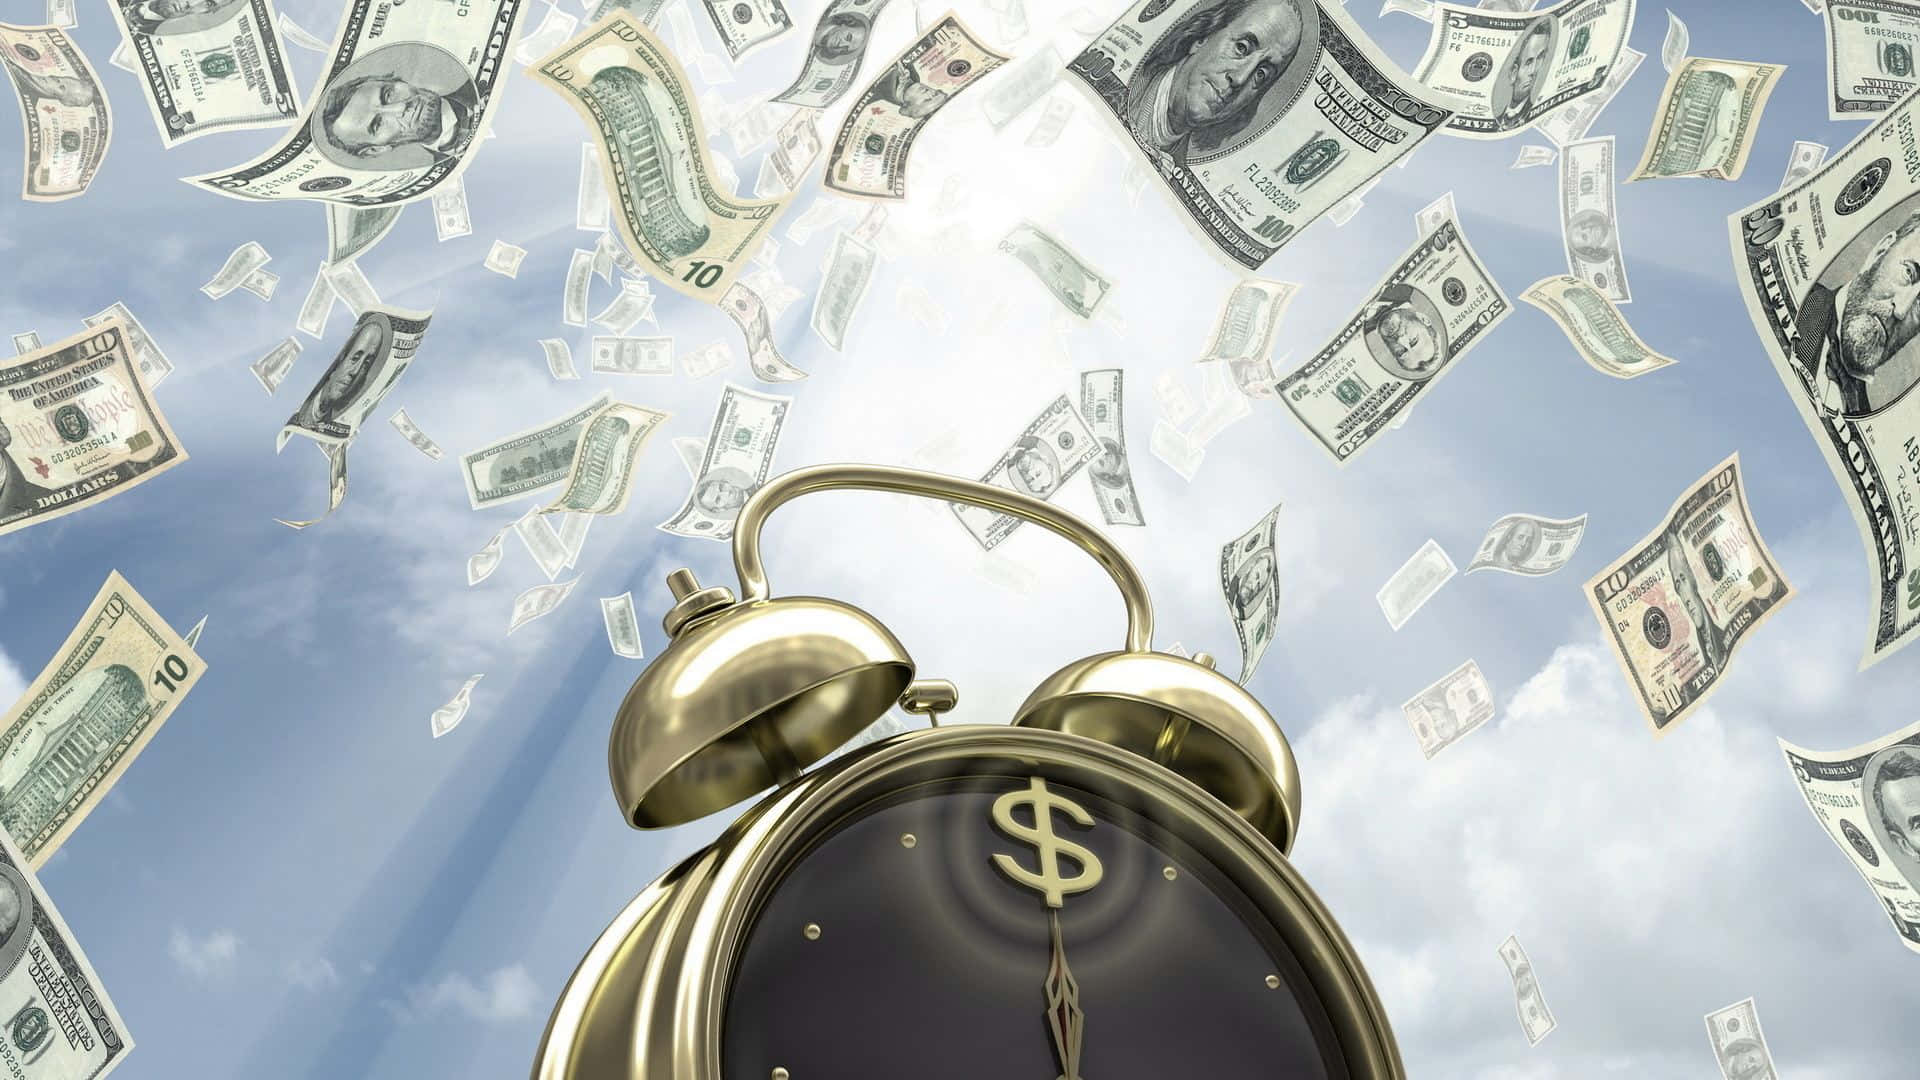 The Alarm Clock and the Money Bag - Time is Money Wallpaper